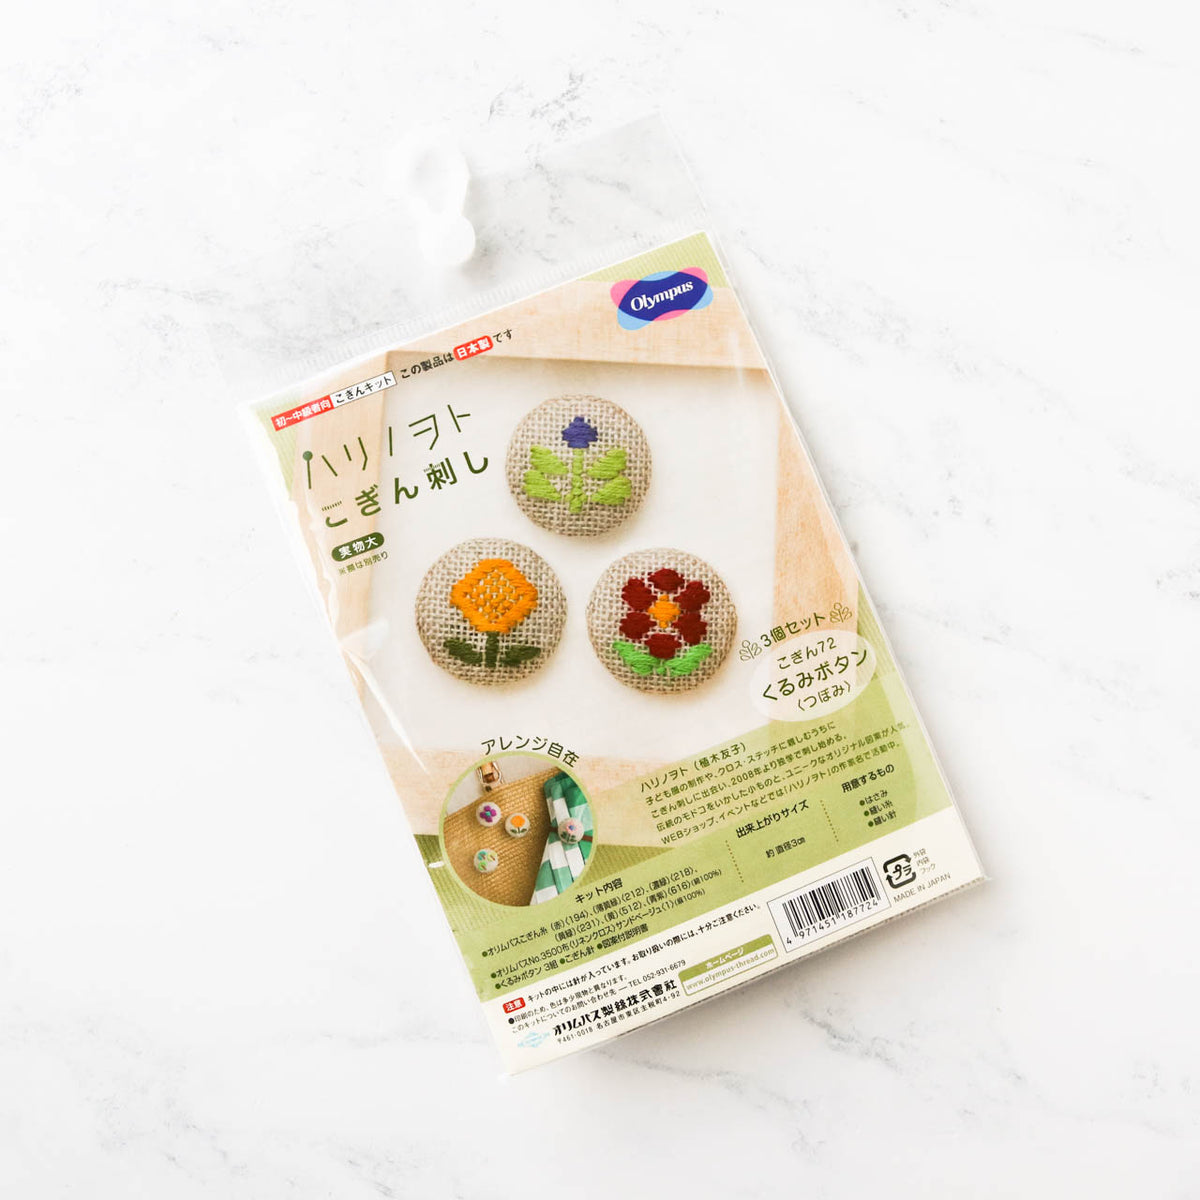 Kogin Embroidery Covered Button Kit - Floral Set 1